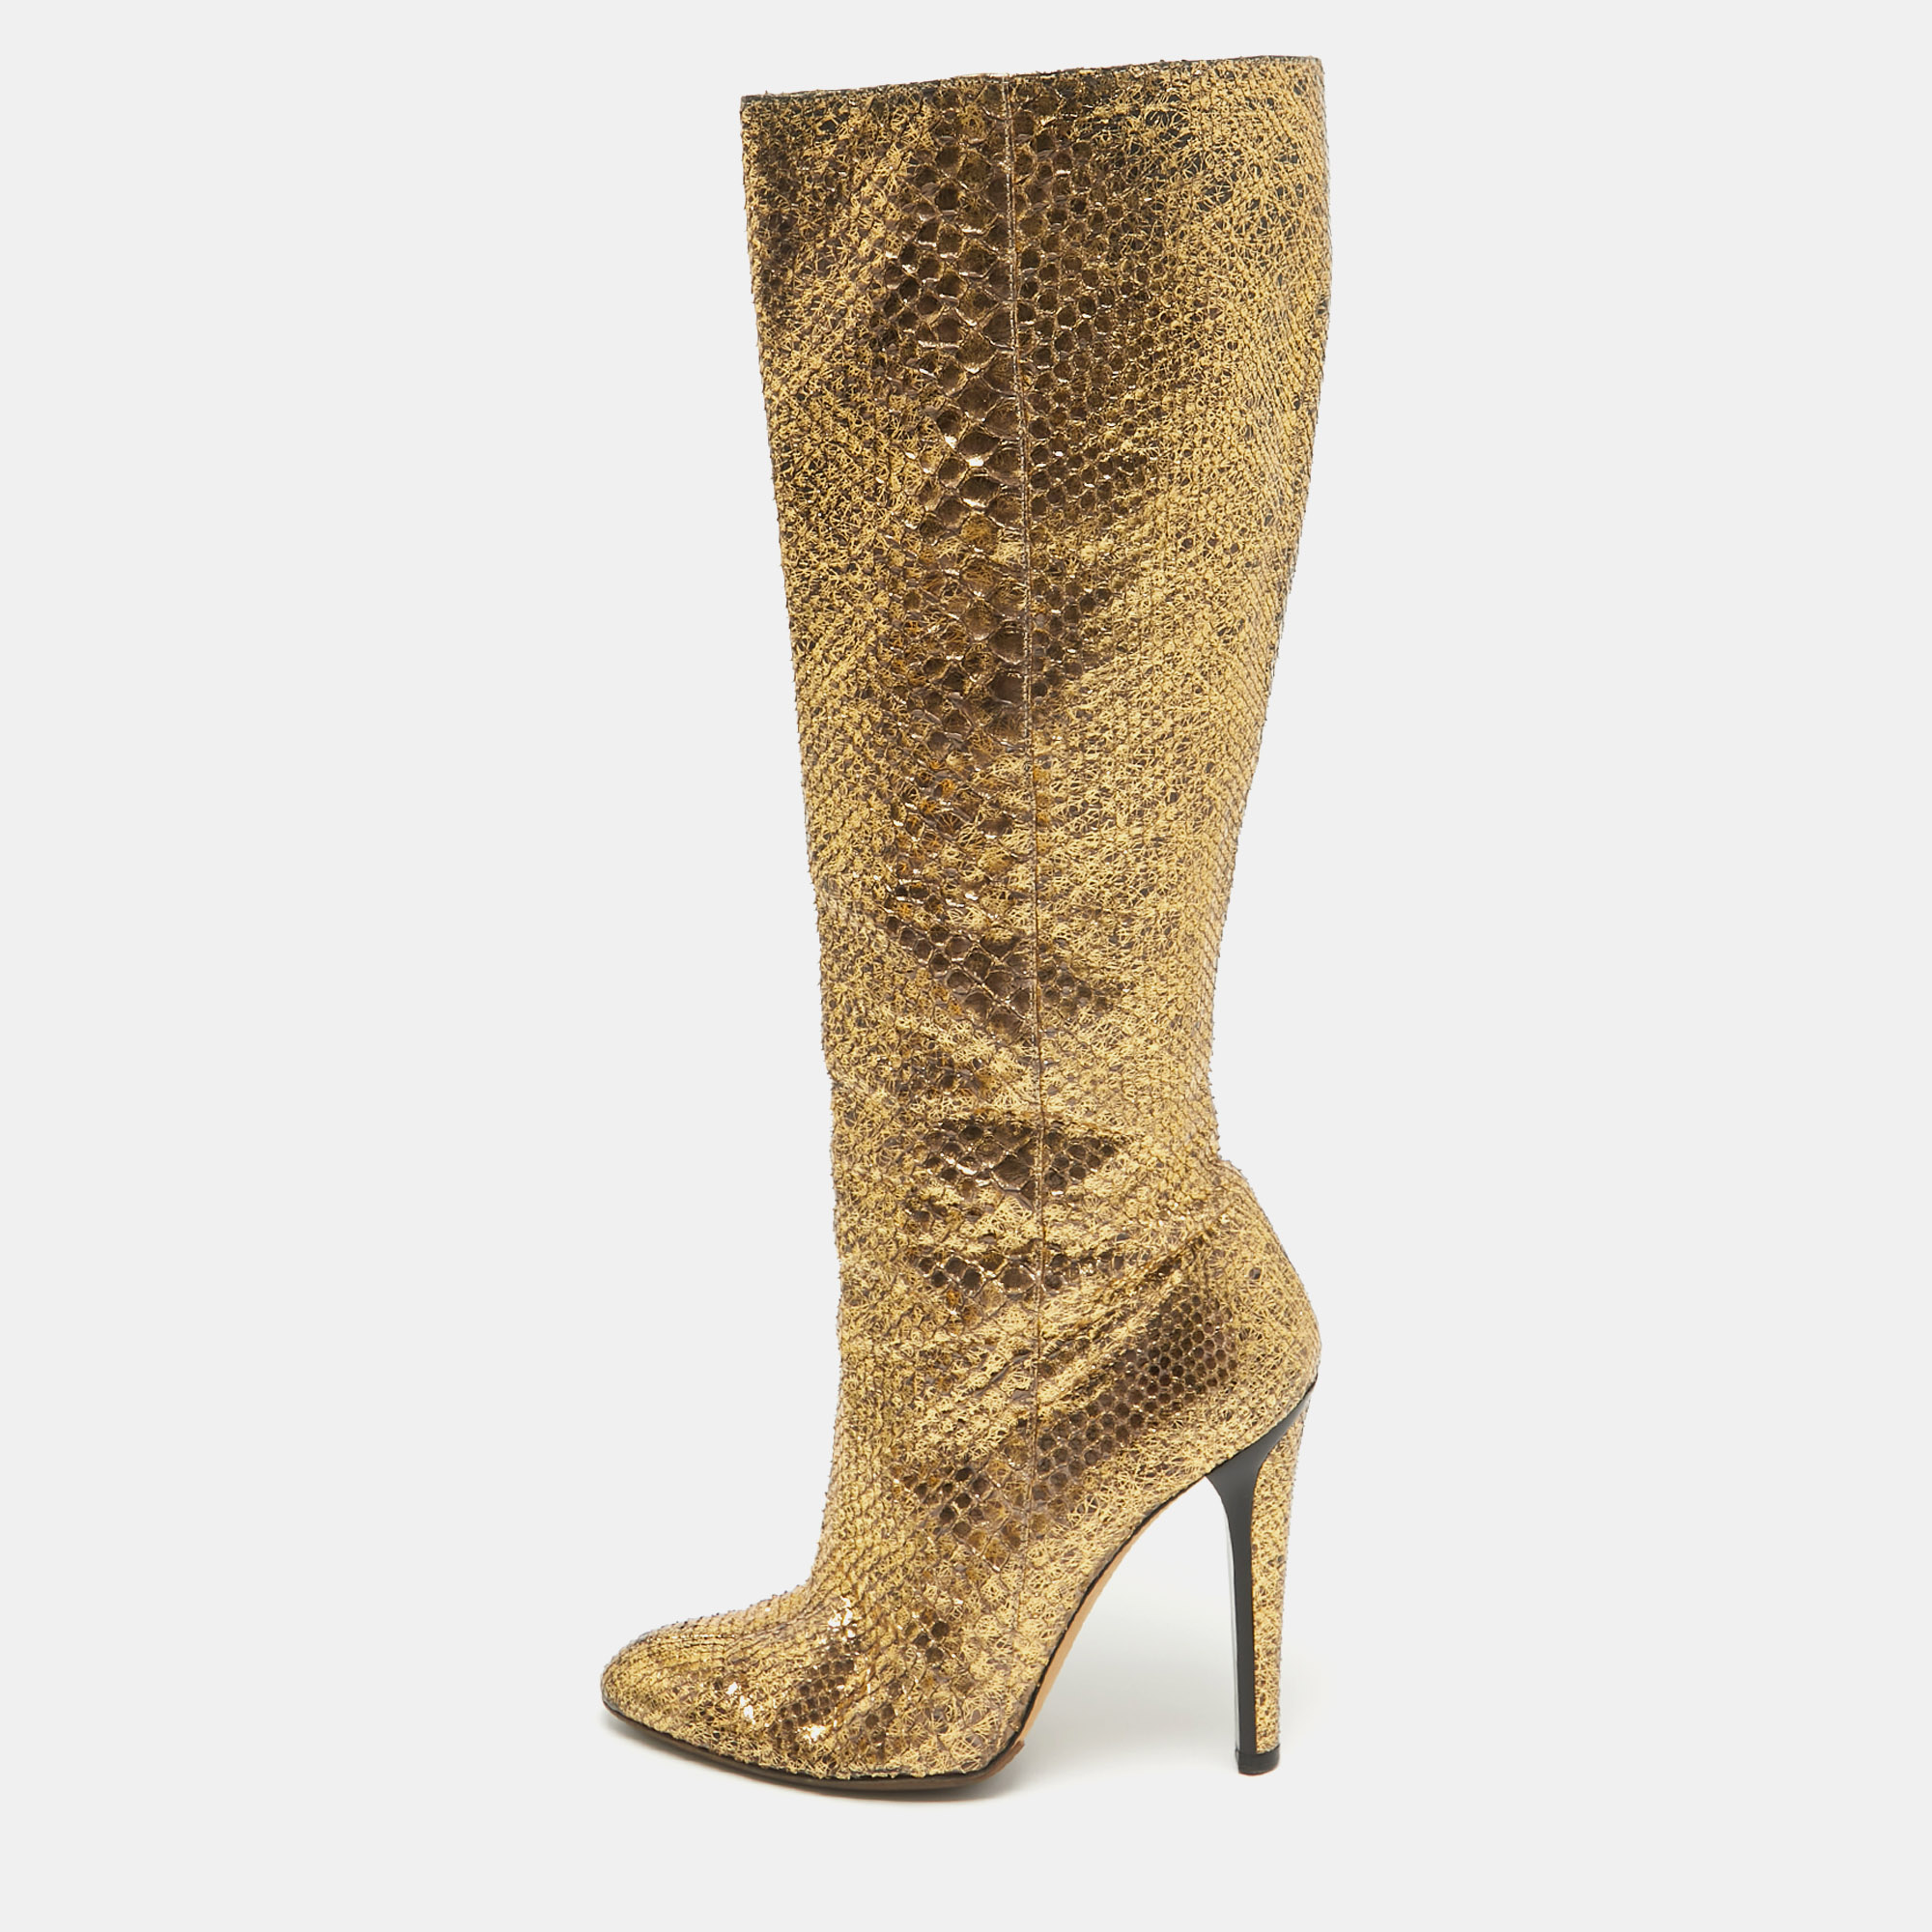 Pre-owned Jimmy Choo Gold Python Leather Knee Length Boots Size 37